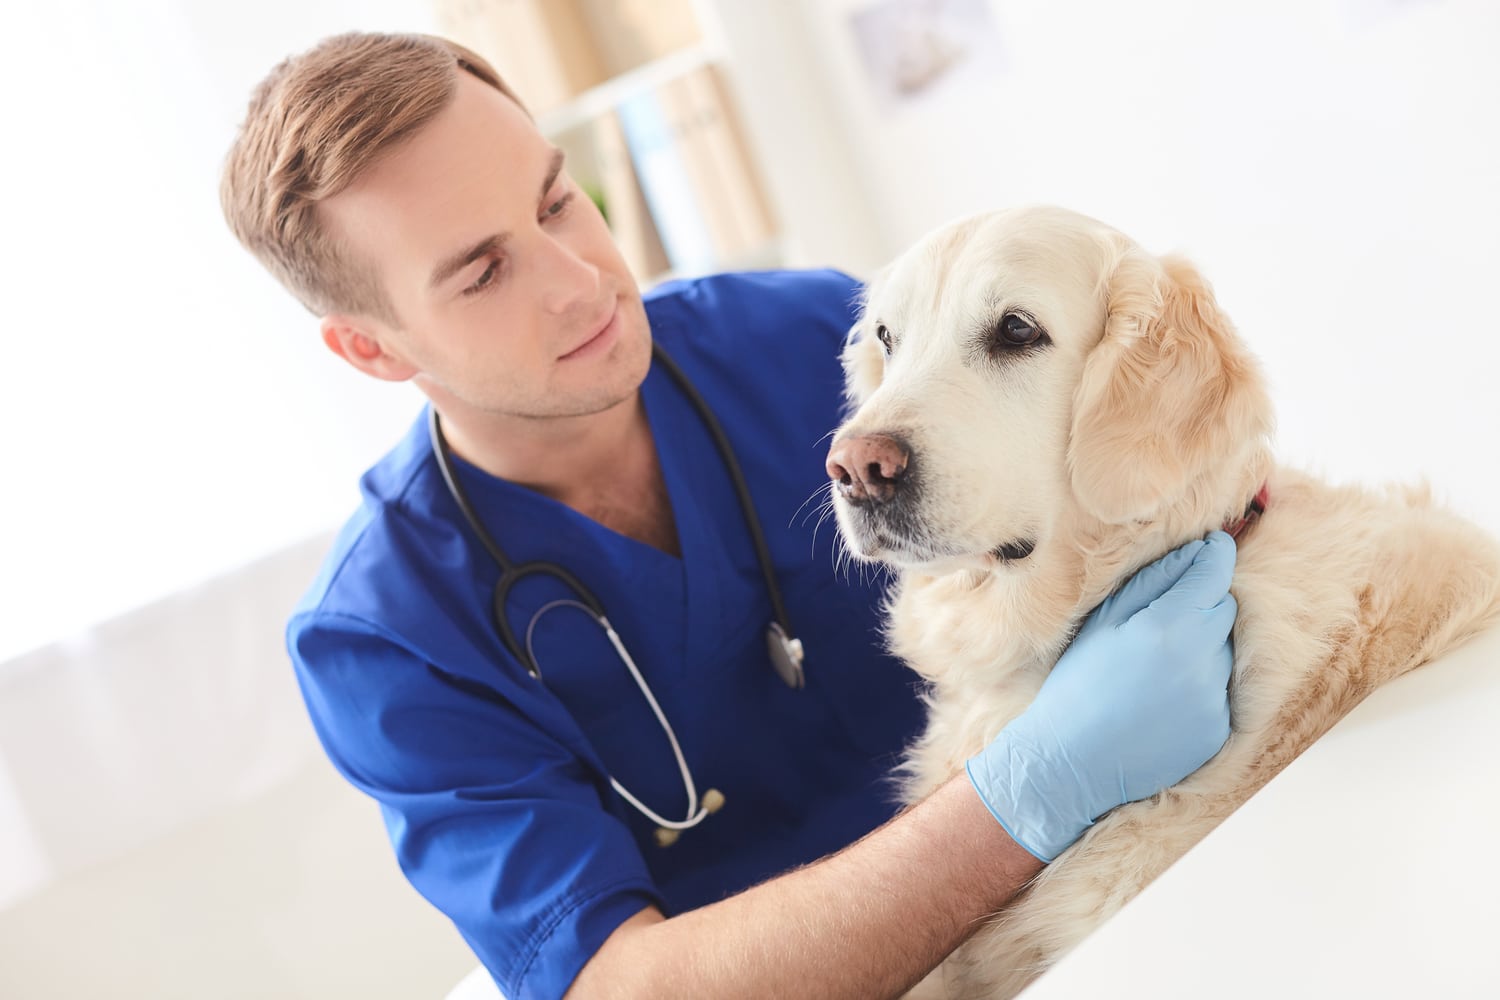 Canine Coronavirus: How To Protect Your Dog Against COVID-19 Virus